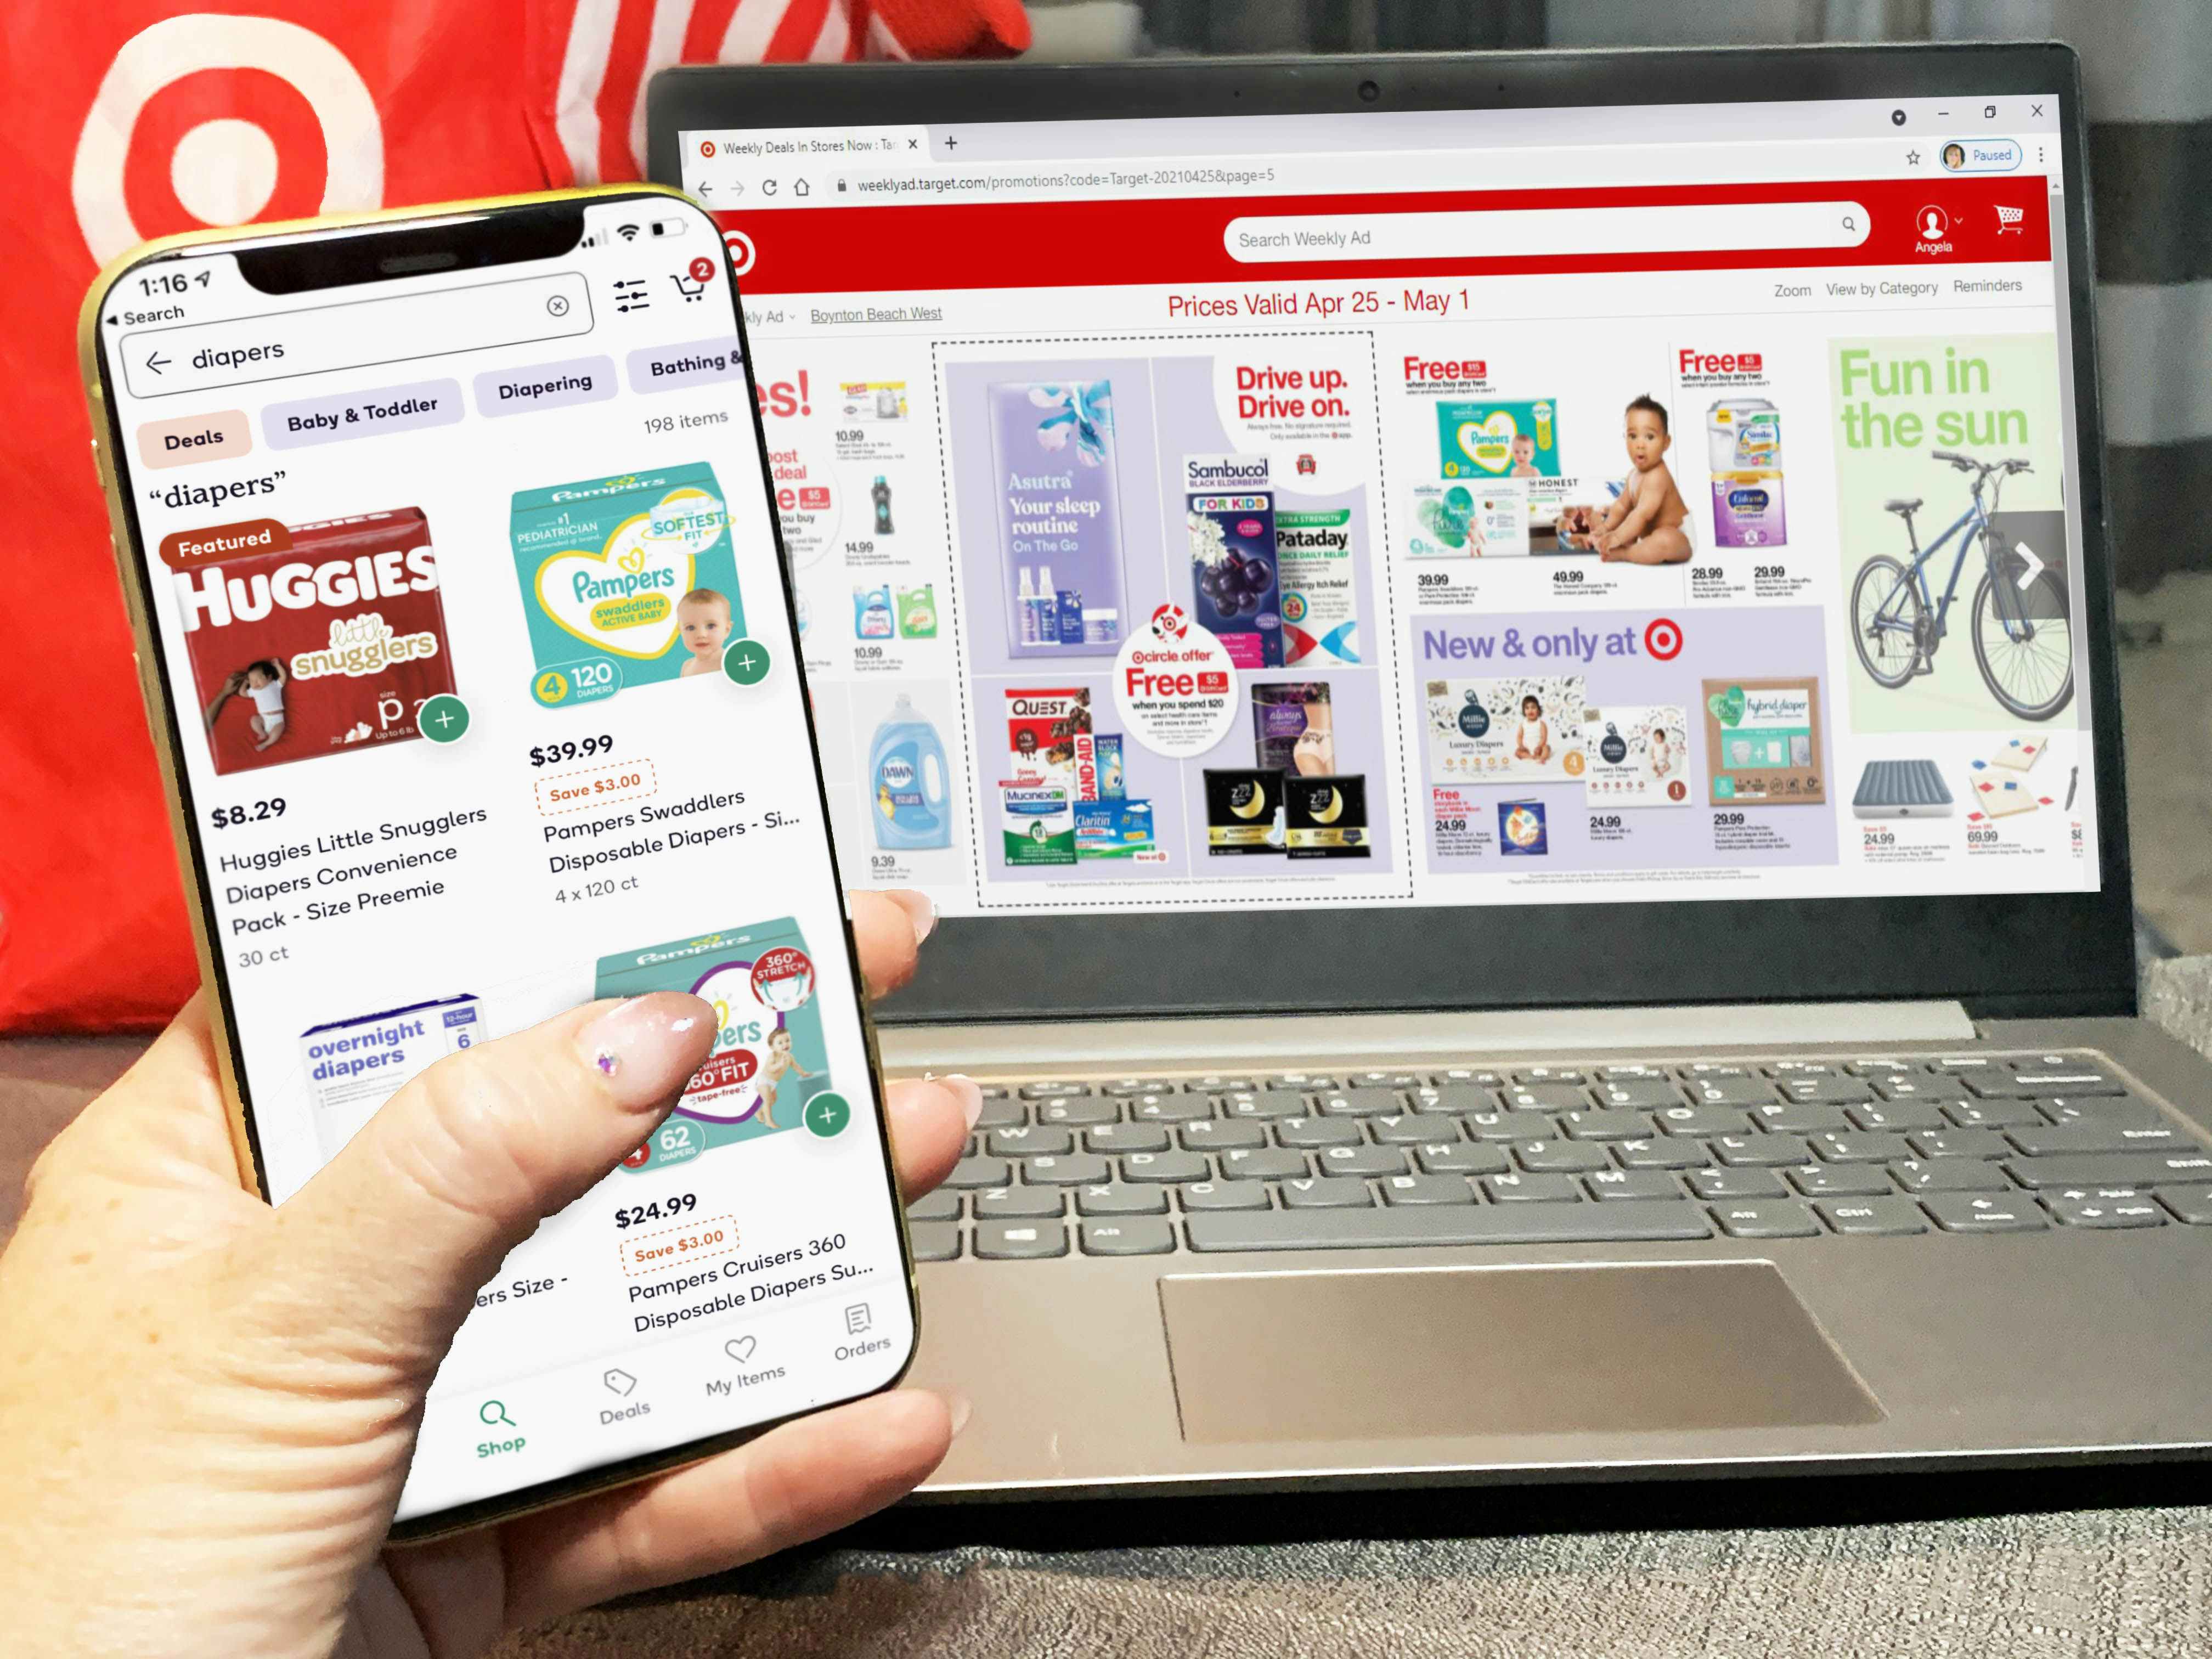 A person's hand holding their phone displaying the Shipt app's results for diapers at Target in front of a laptop displaying Target's weekly ad.